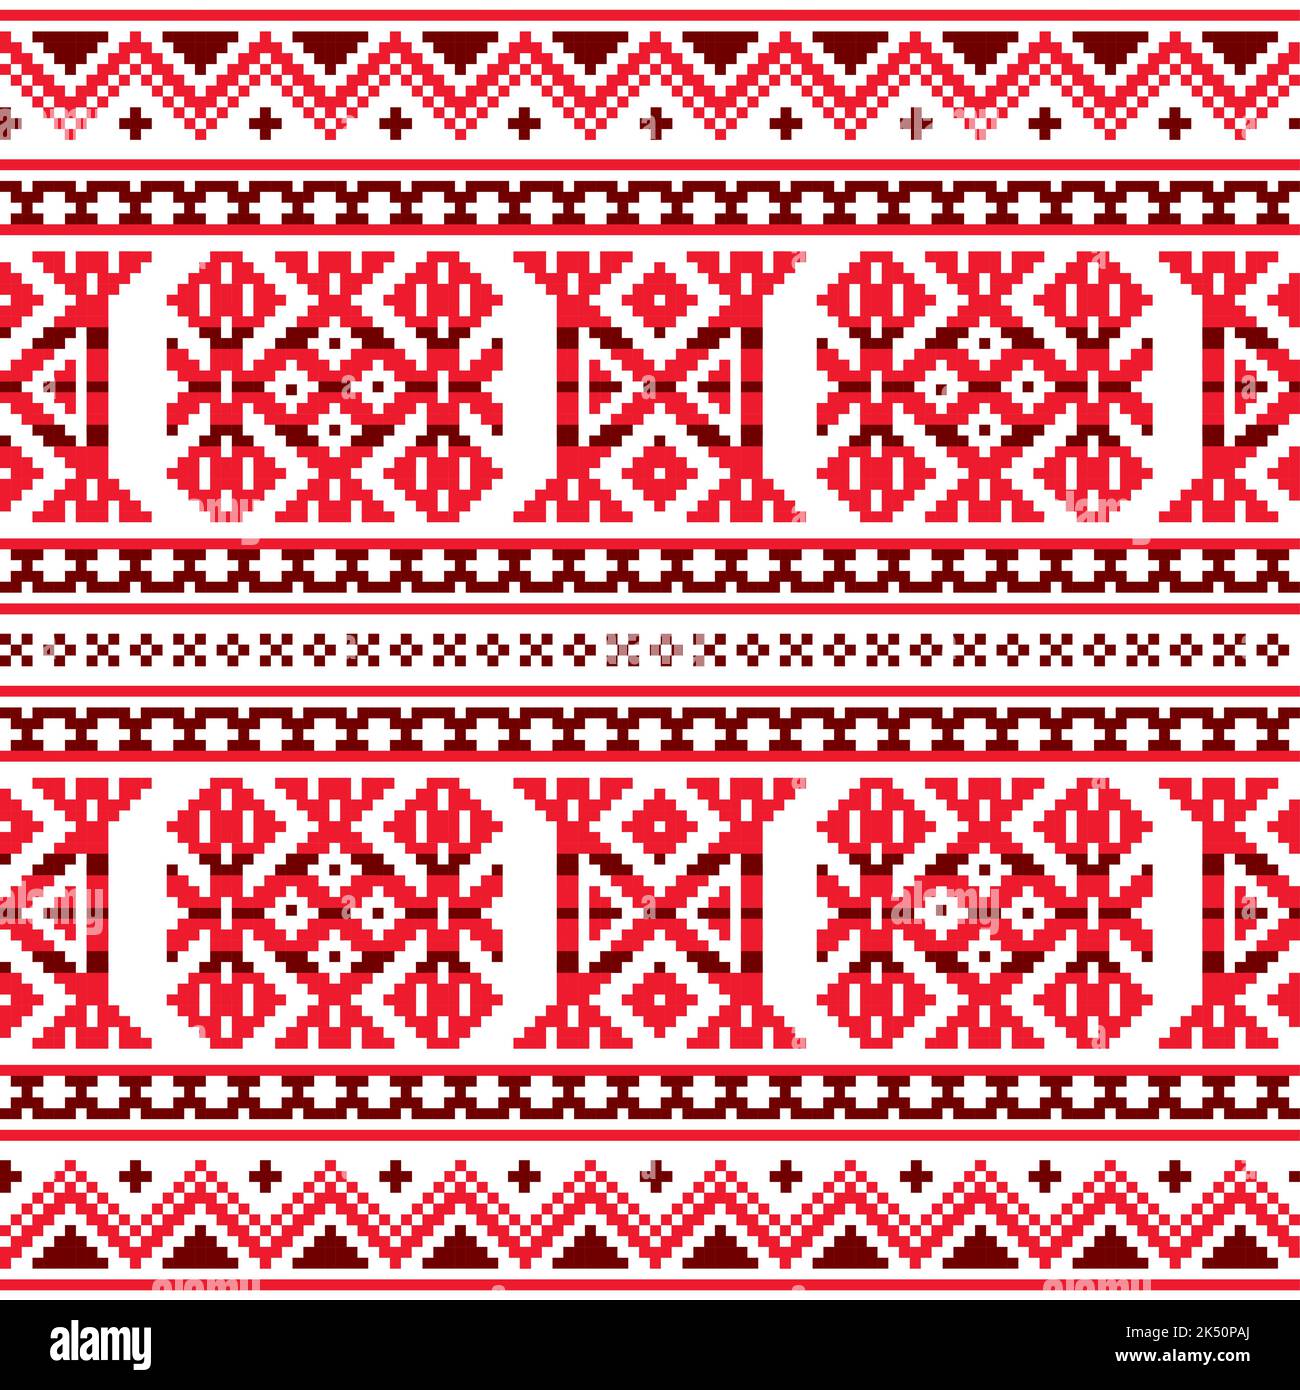 Sami folk art vector seamless pattern, retro design styled as traditional cross-stitch ornament from Lapland in red Stock Vector